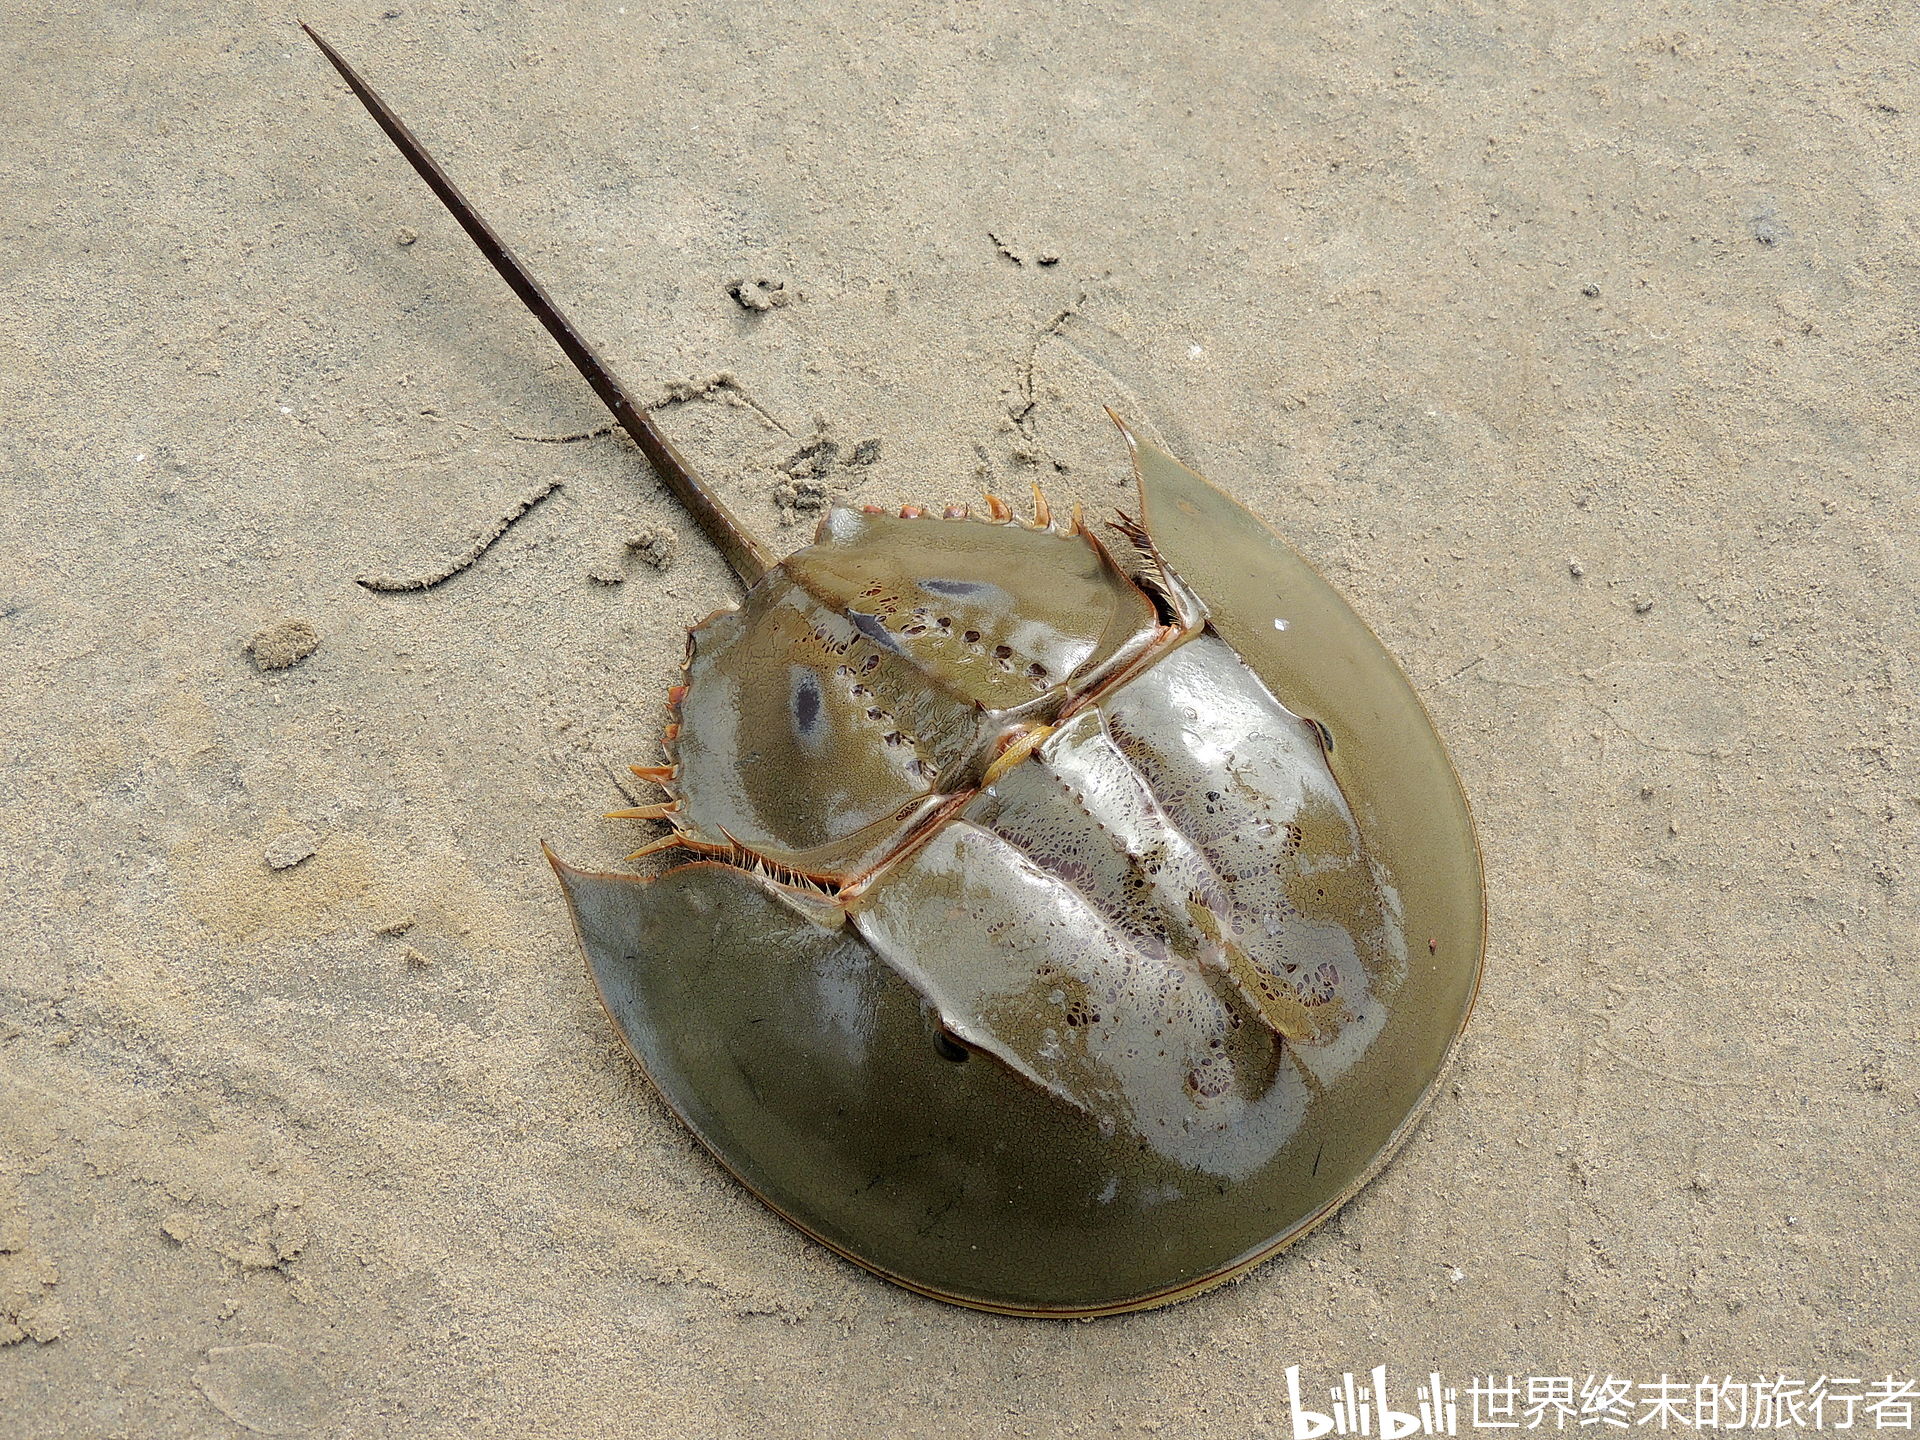 The blue blood of the horseshoe crab - Mapping Ignorance